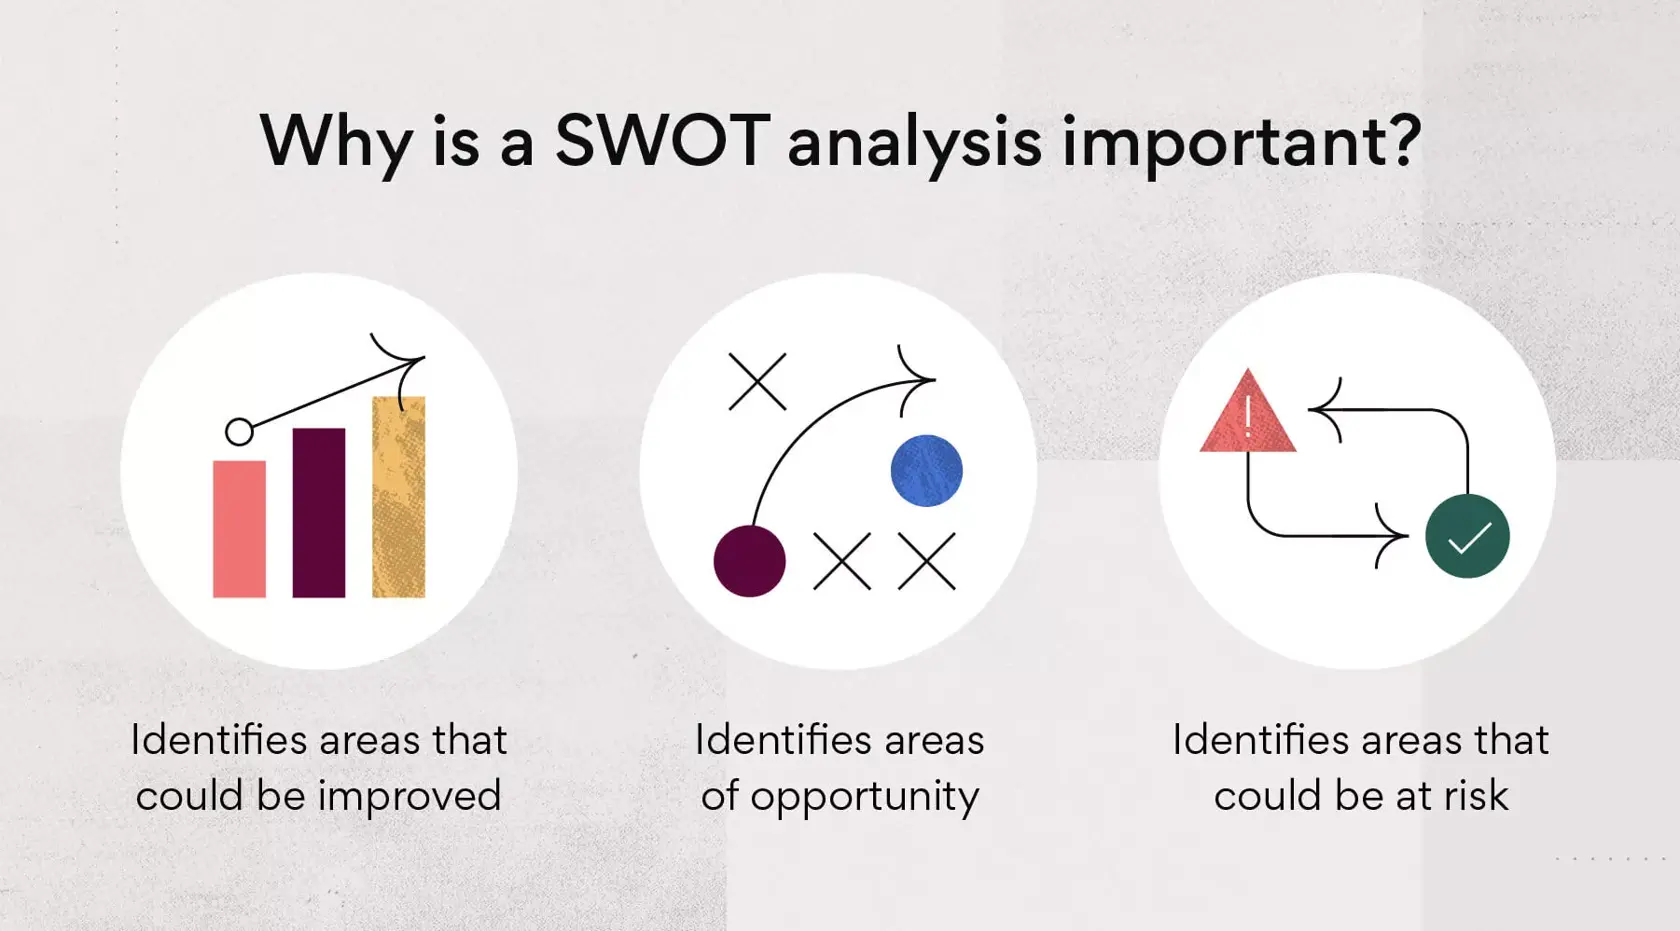 Why is a SWOT analysis important?